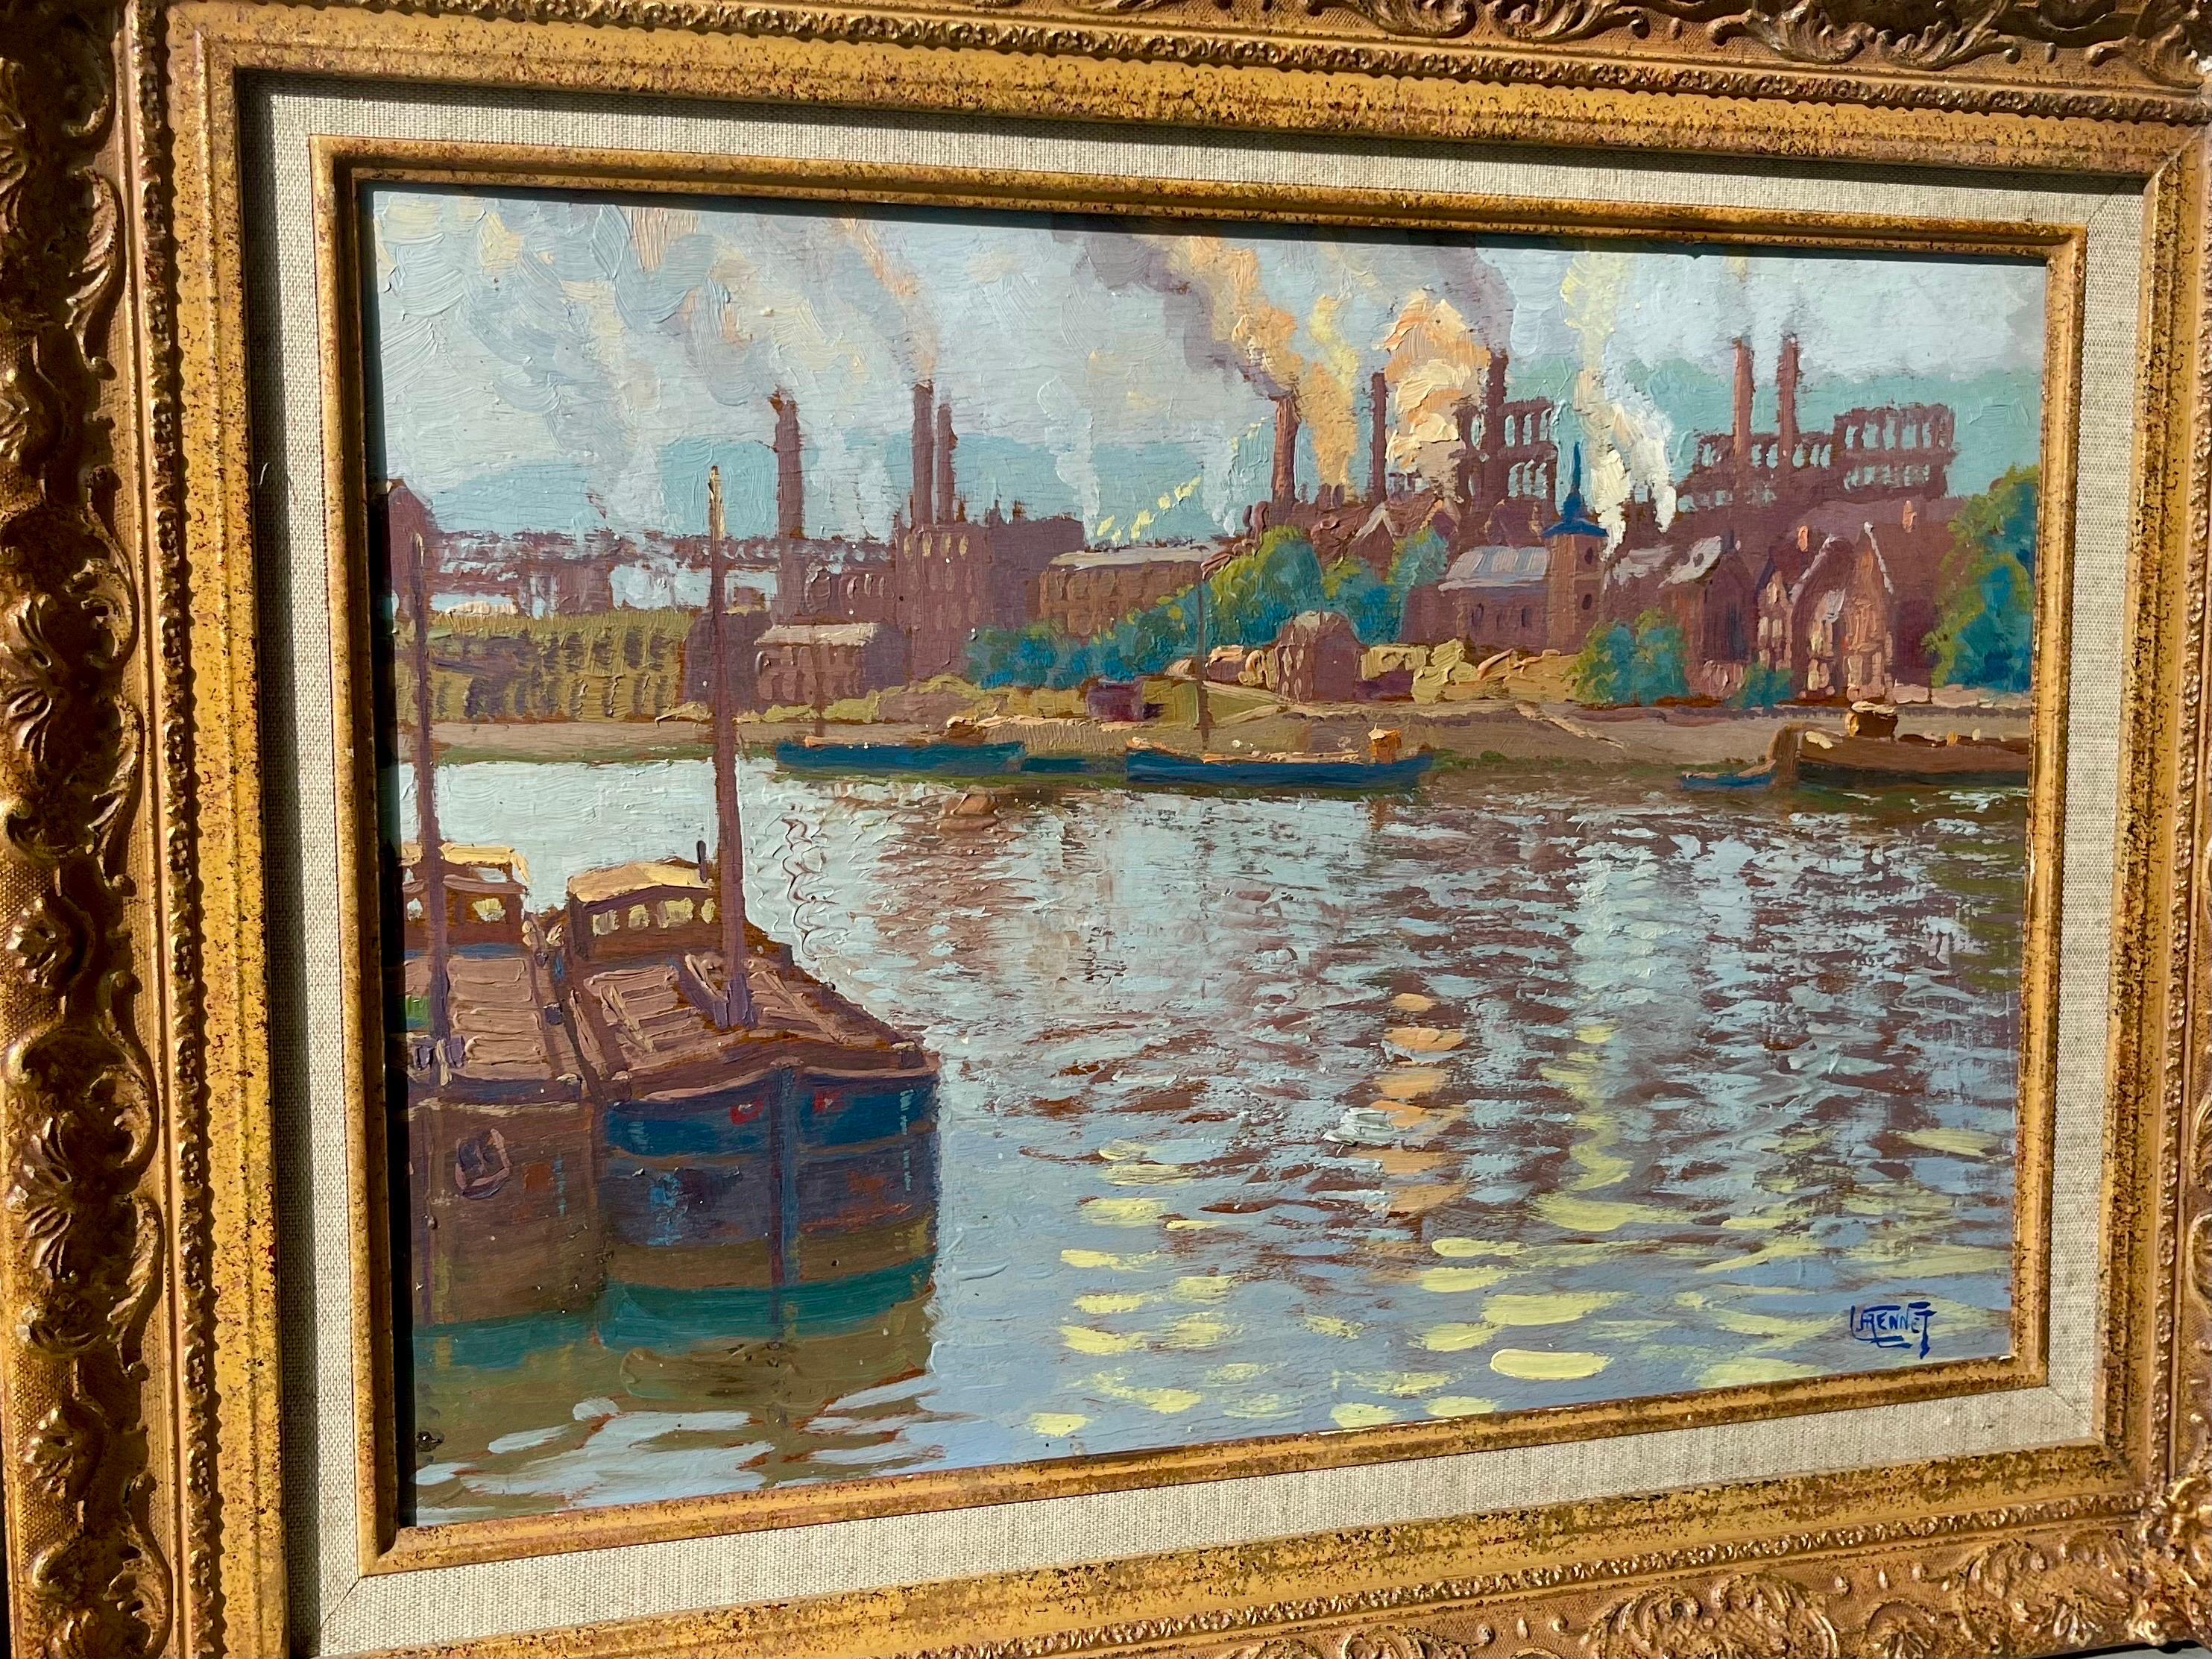 Wonderful and vibrant French post impressionist painting depicting a canal on a sunny summer day. Housed in an antique frame of the period. Painted with swift and confident brush-strokes this work marvellously captures the essence of impressionism